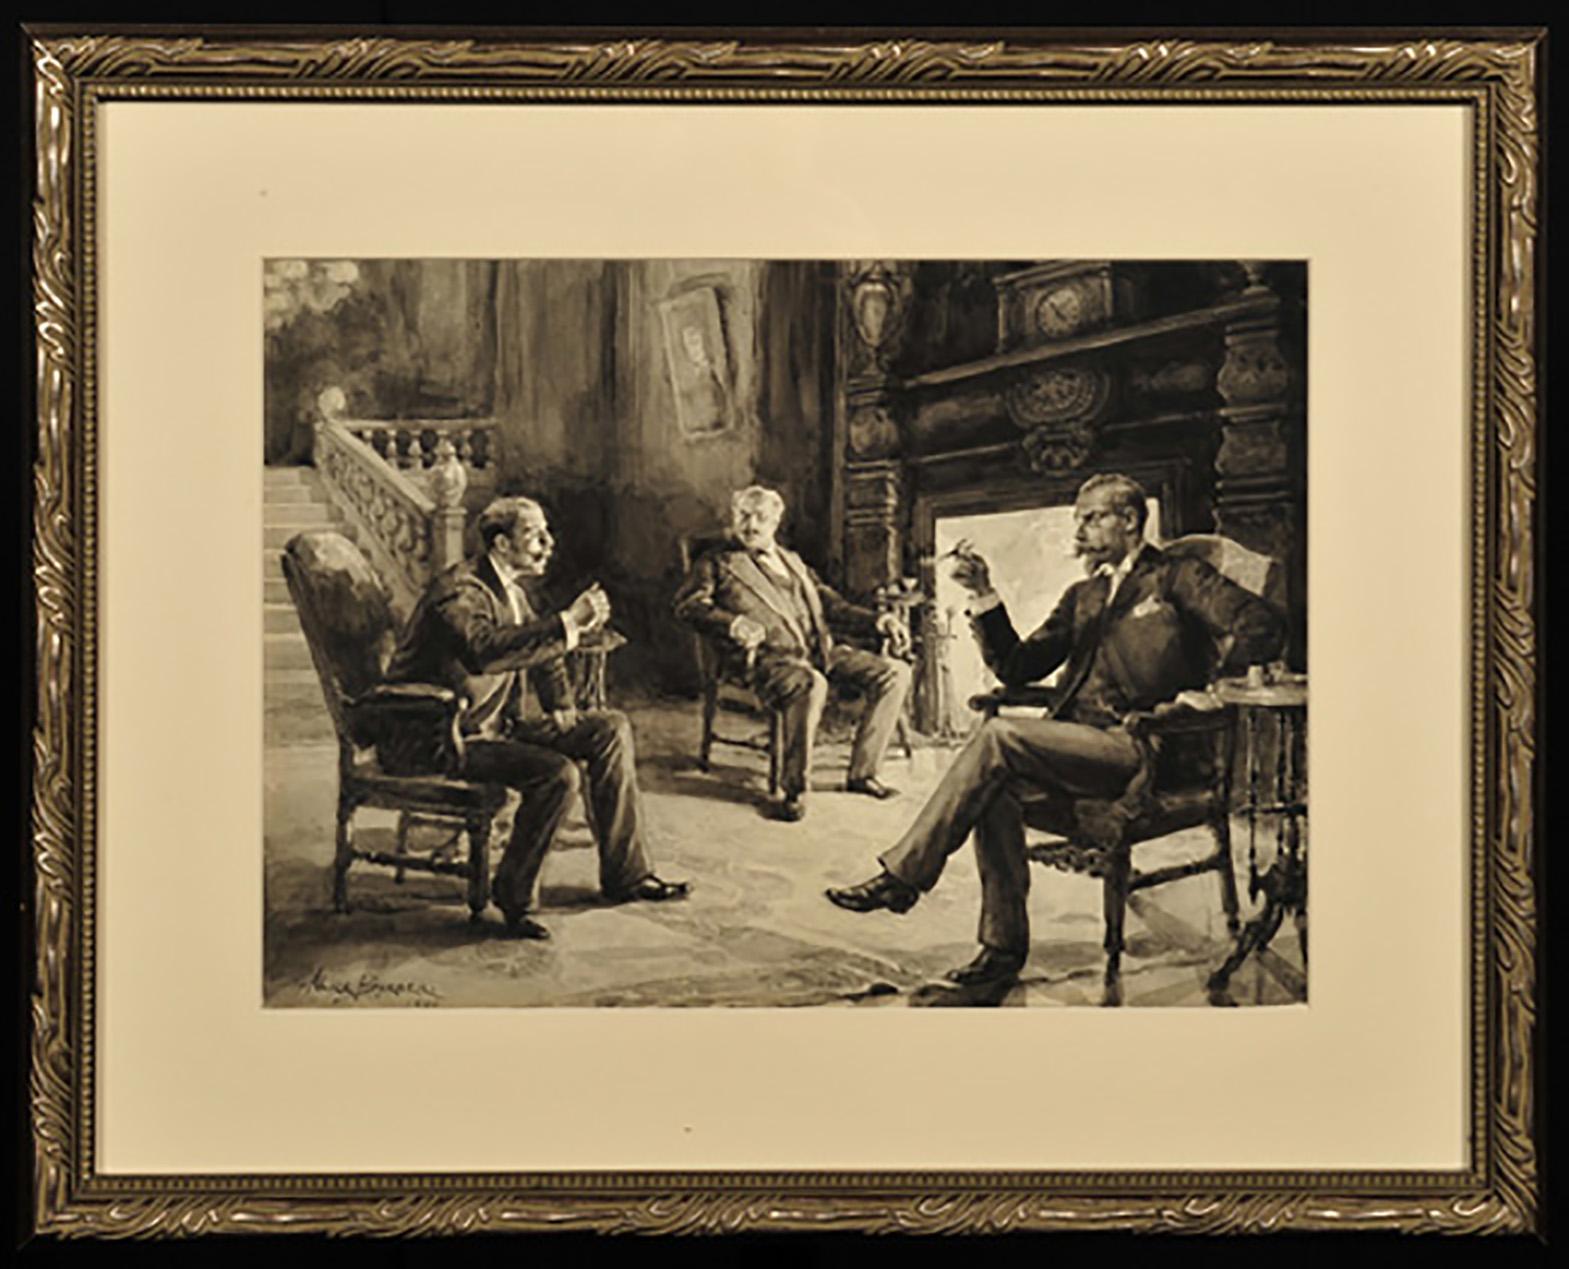 Men in Discussion Fireside - Art by Alice Barber Stephens